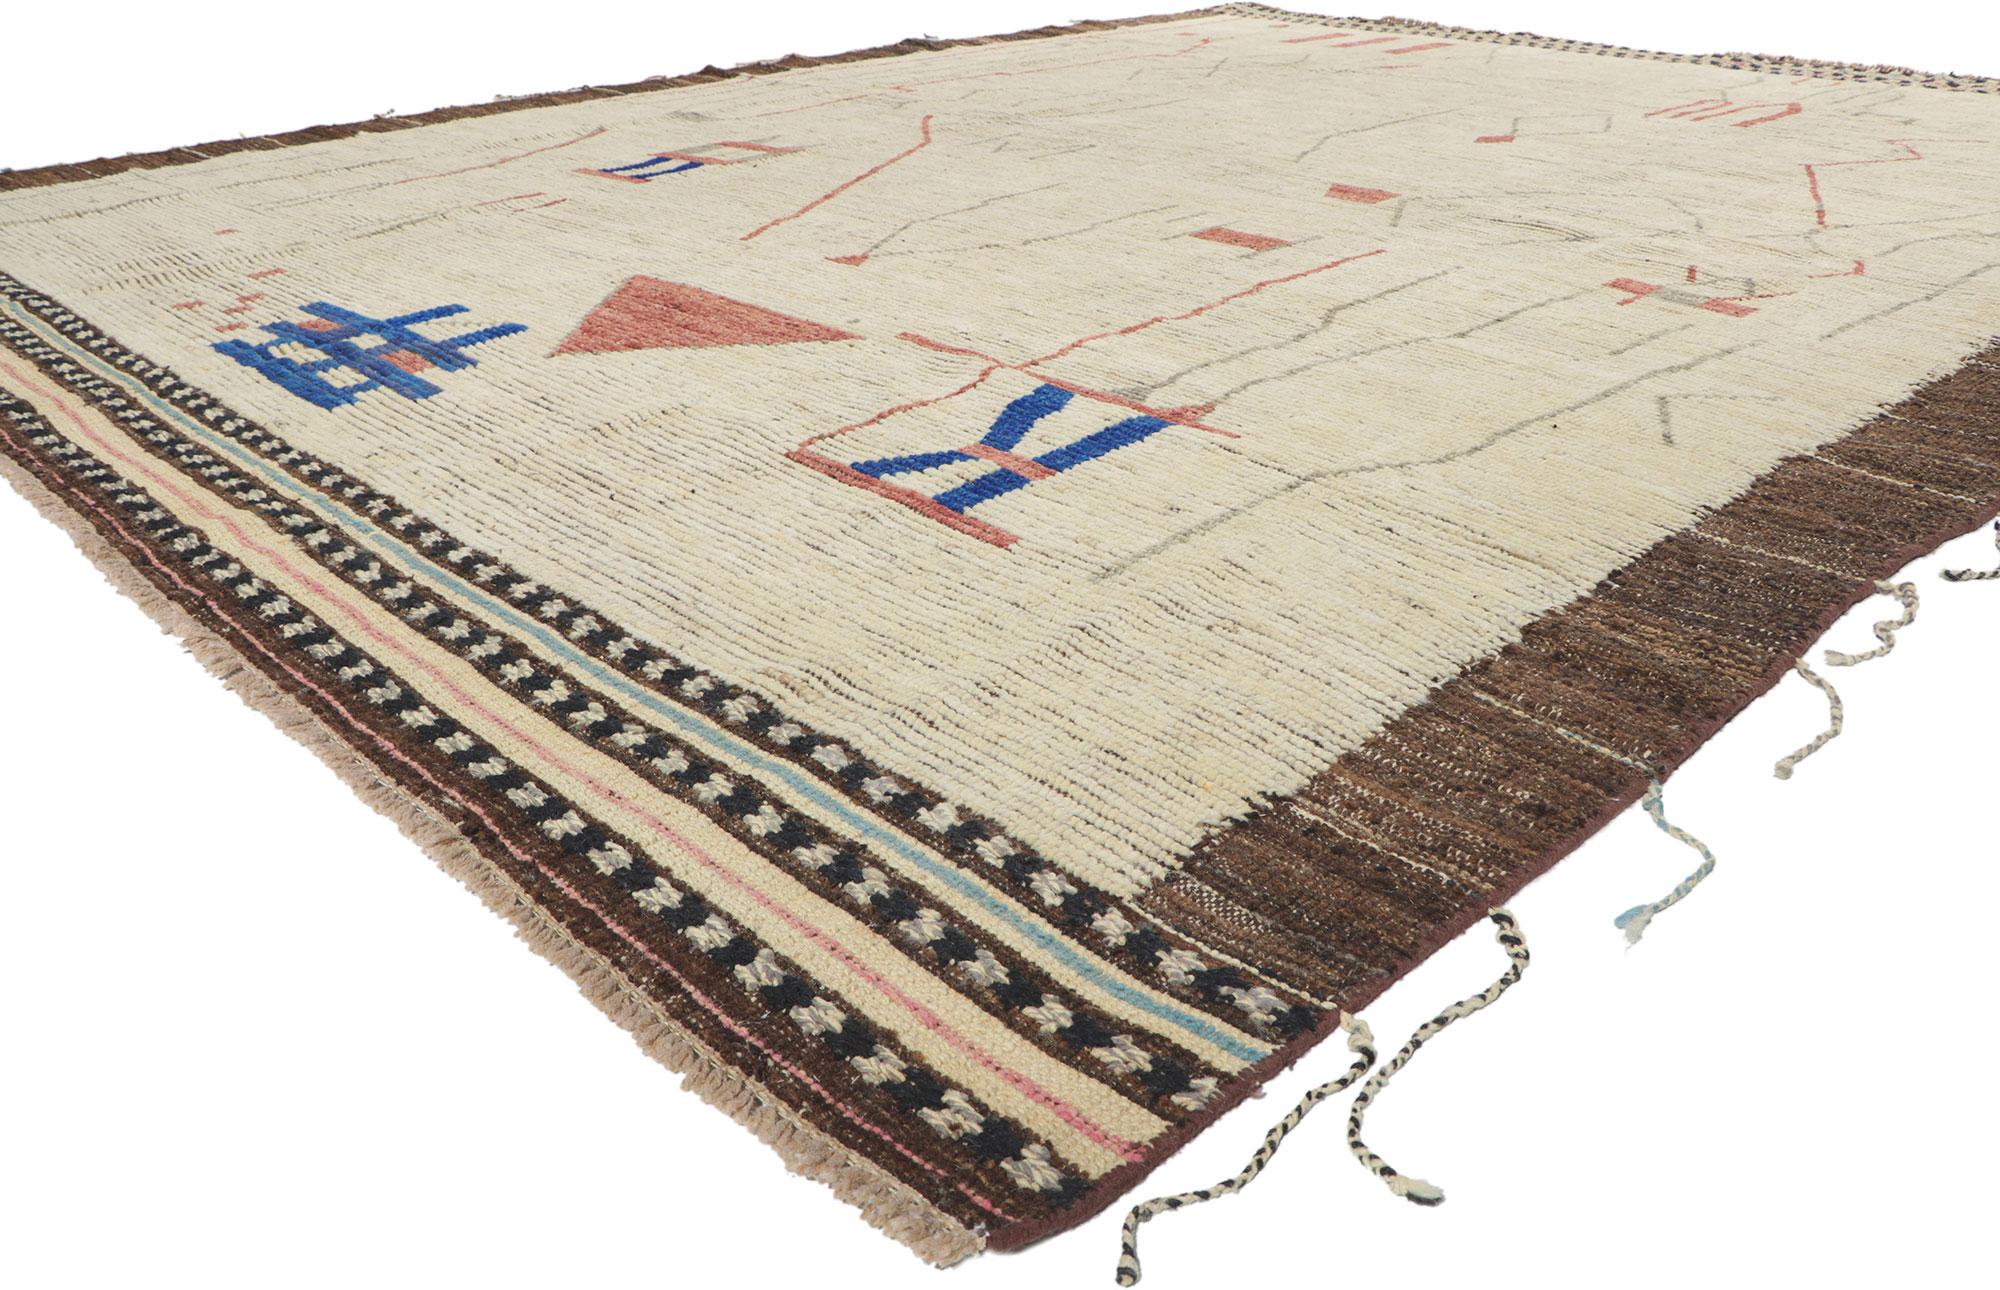 80711 New Moroccan Brutalist style rug Short Pile 10'04 x 13'06. Recalling the Brutalist, this short pile Moroccan rug is an amalgam of International style and the very definition of celebrated and spirited high end Brutalist art. Asymmetrical